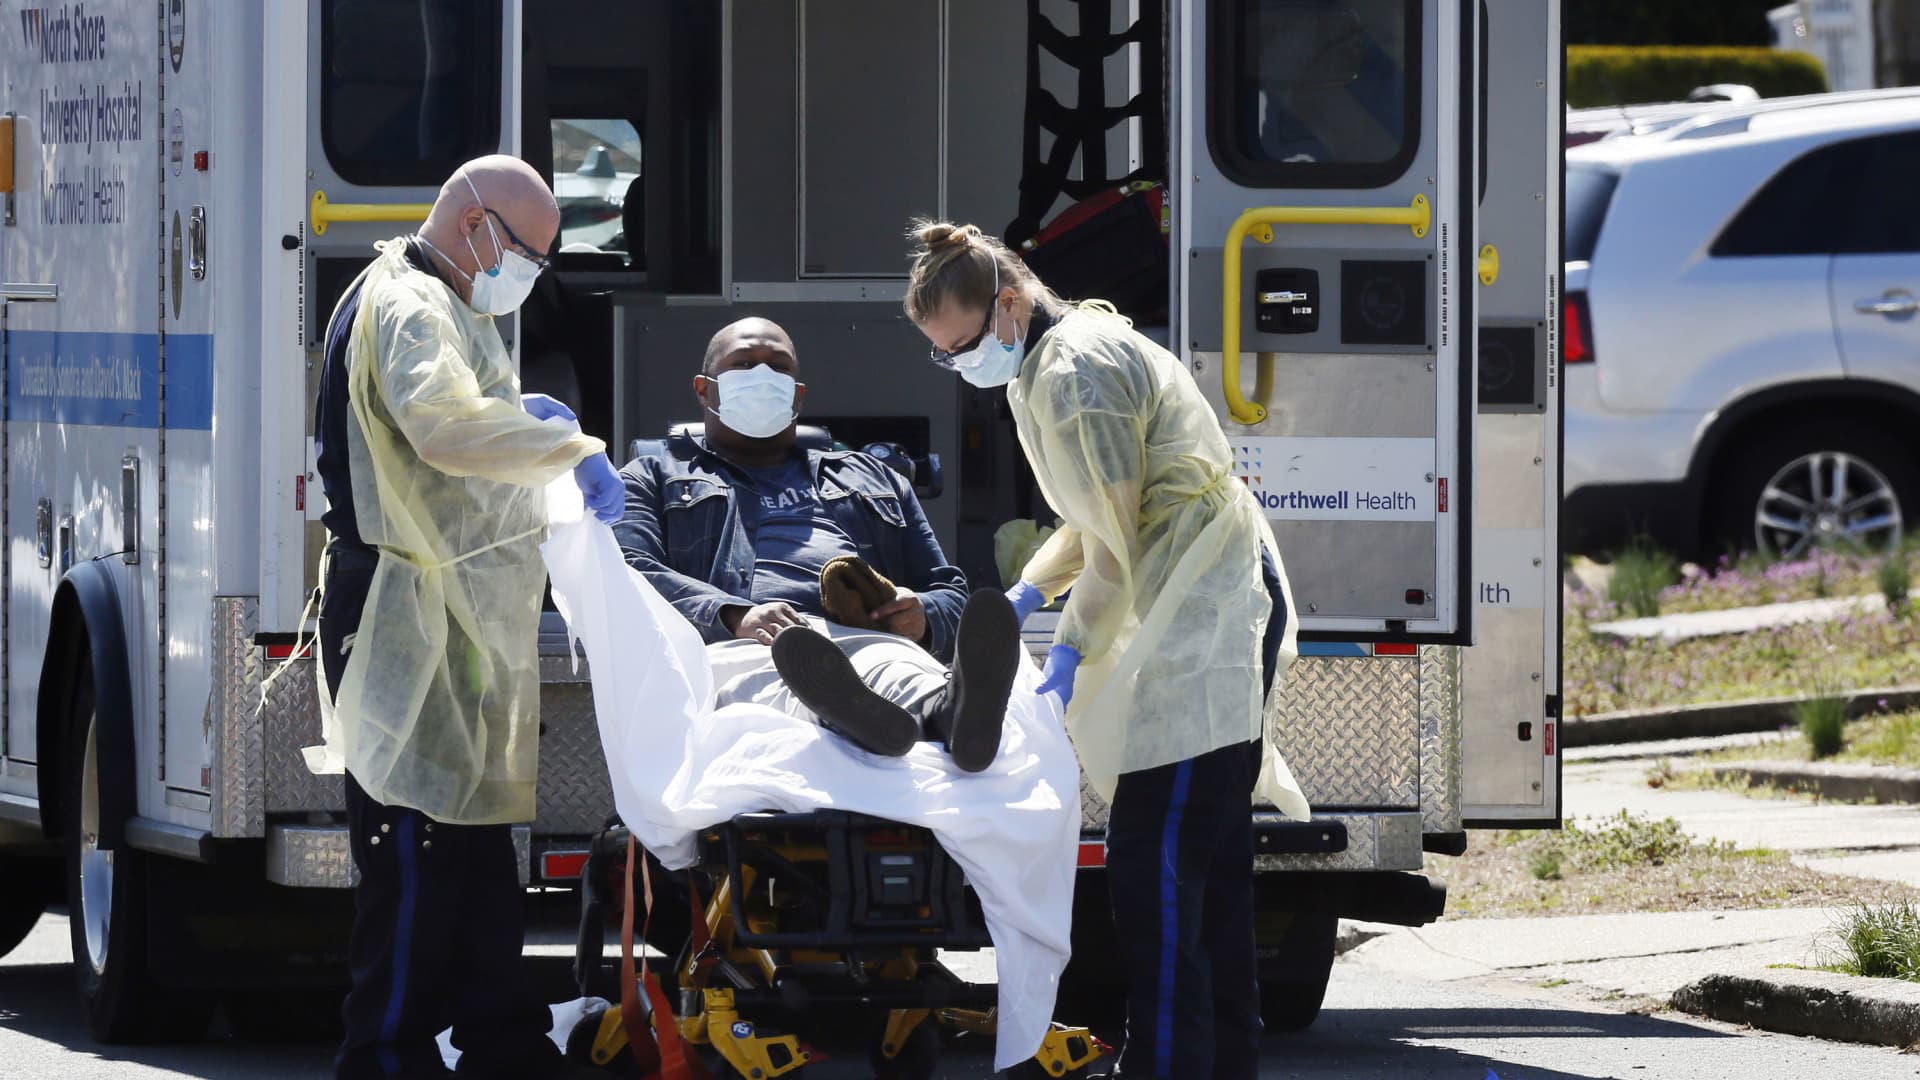 Emergency Medical Technicians (EMT) lift a patient that was identified to have coronavirus disease (COVID-19) into an ambulance while wearing protective gear, as the outbreak of coronavirus disease (COVID-19) continues, in New York City, New York, U.S., March 26, 2020.